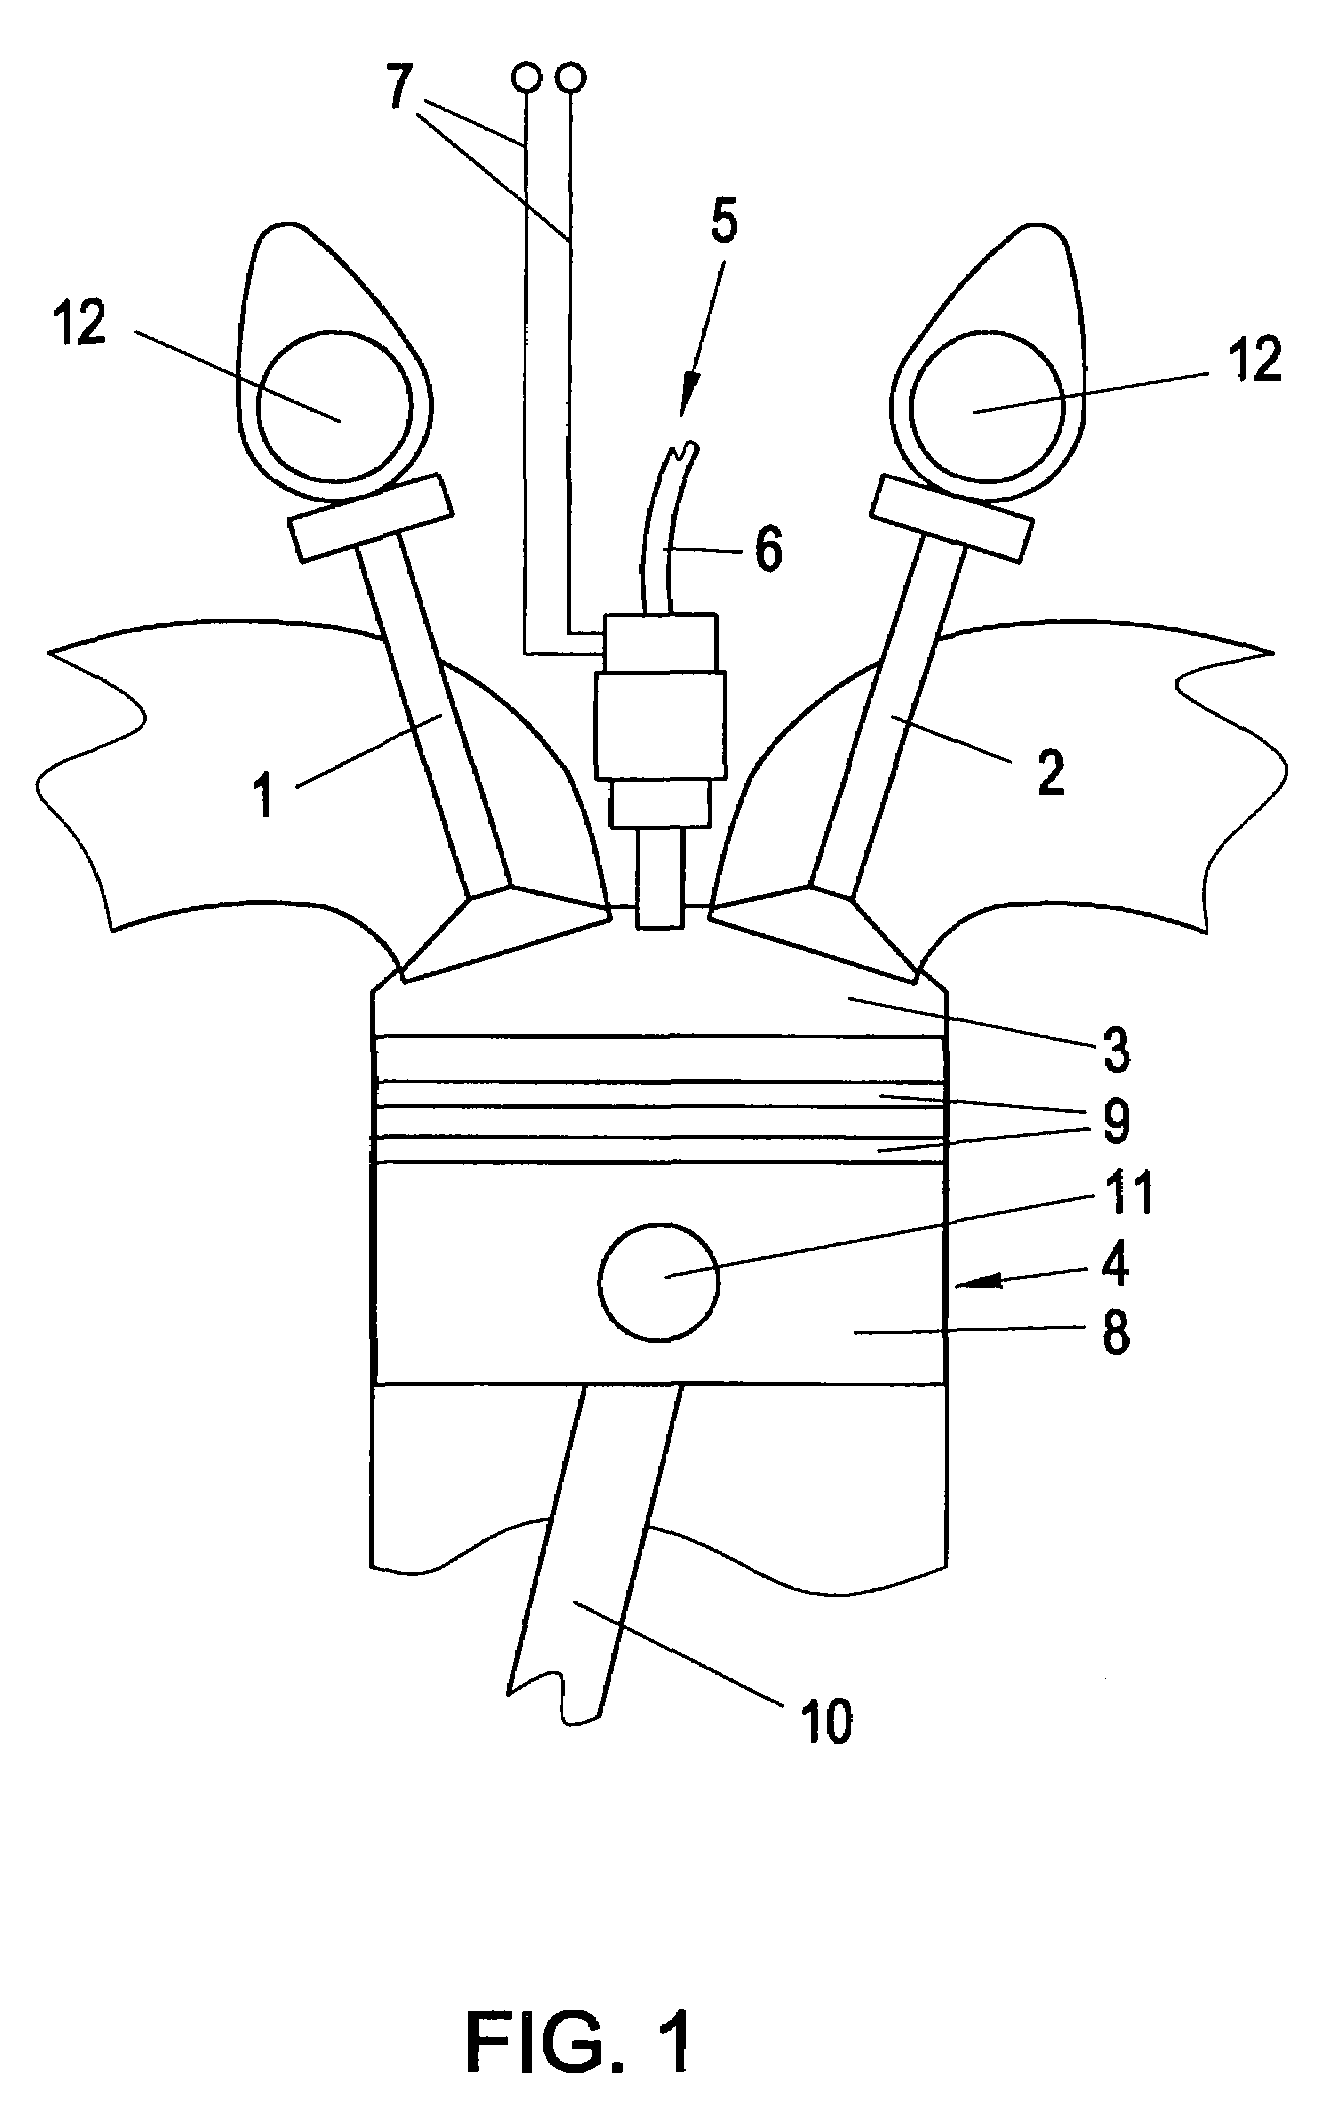 Electromagnetically actuated gas valve